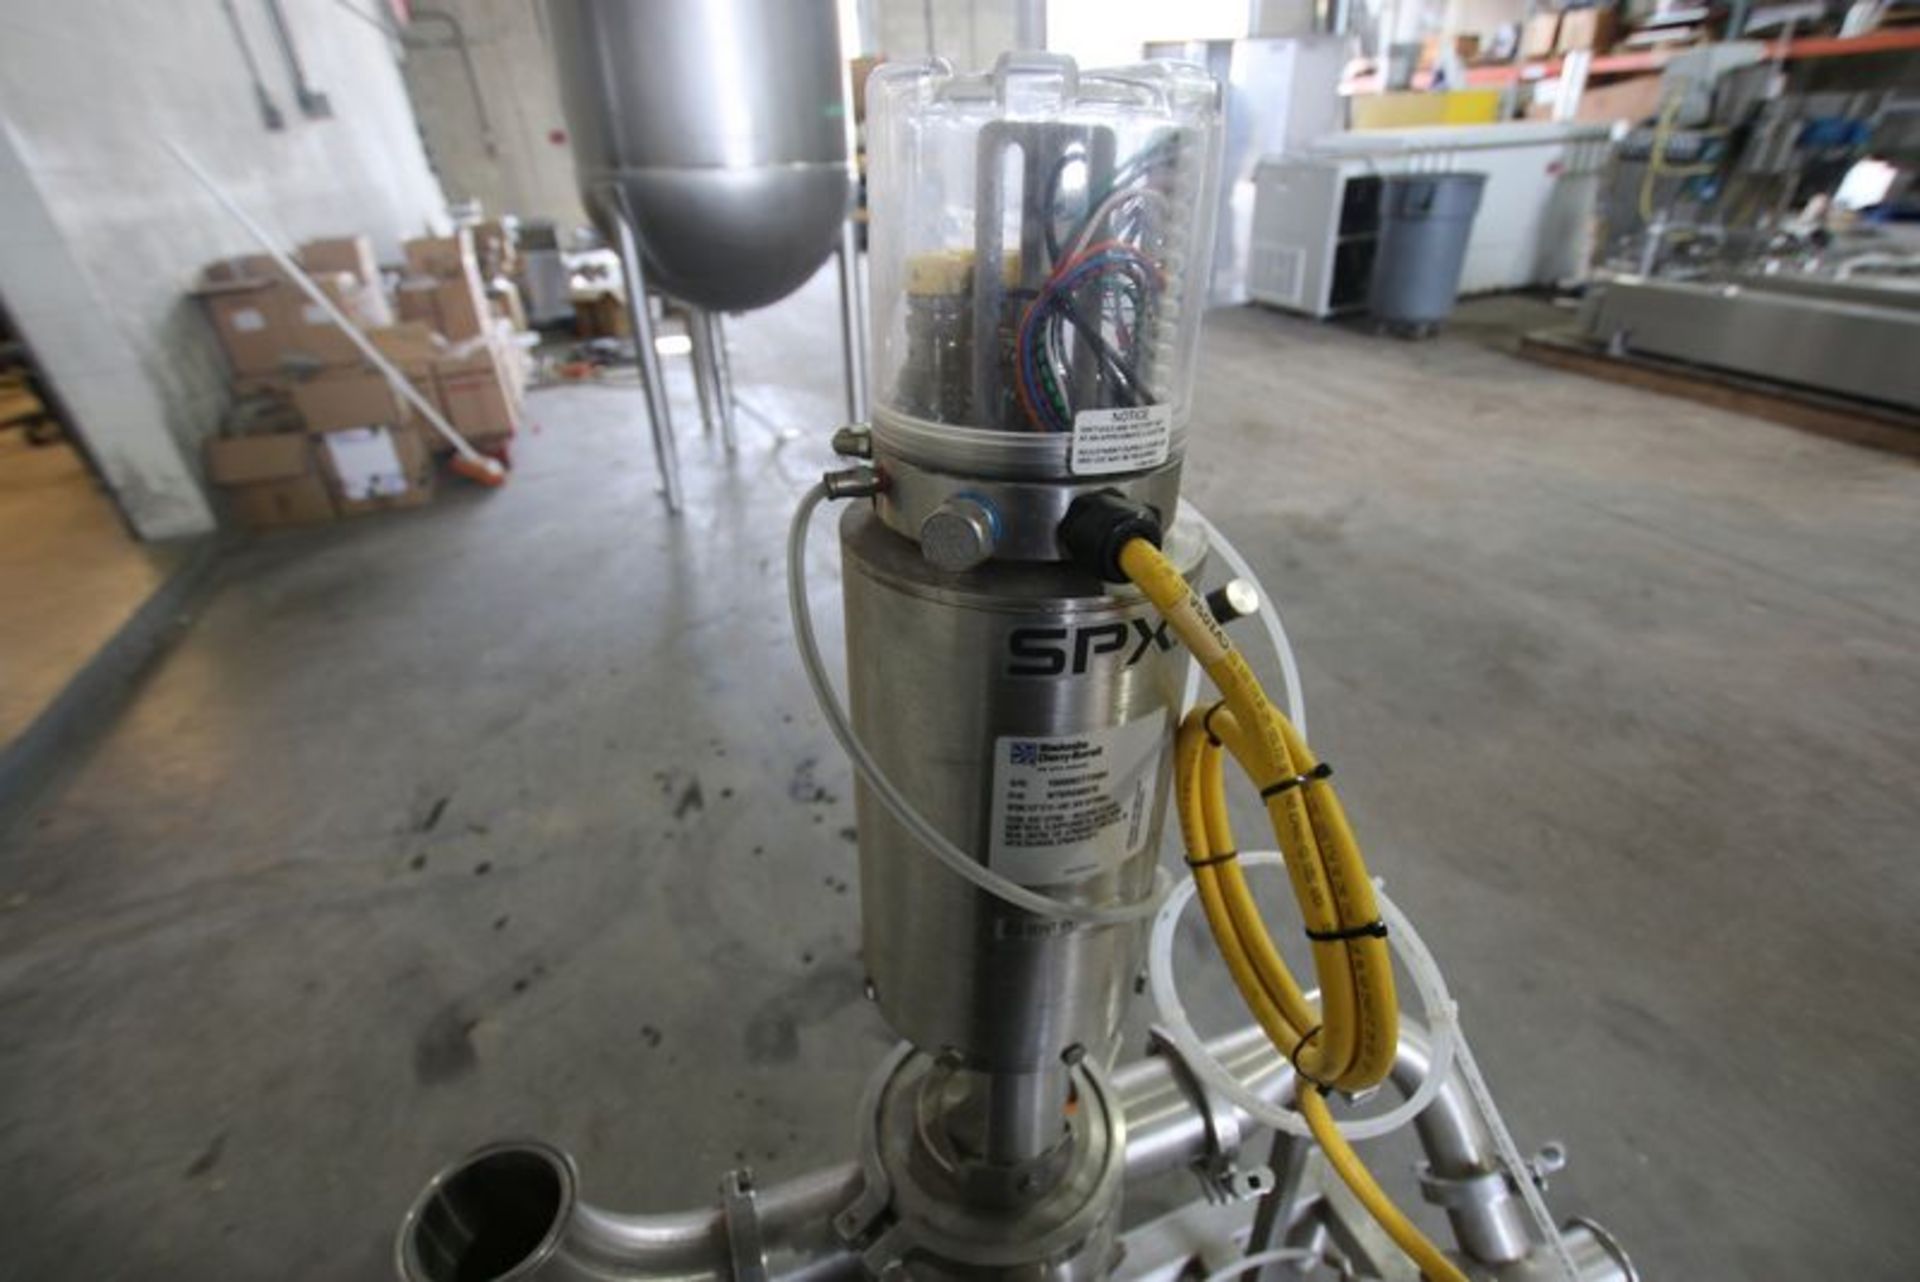 SPX Skid Mounted Metering System. Project # US-5412004. Includes Endress Hauser 3" Online Flow Meter - Image 4 of 10